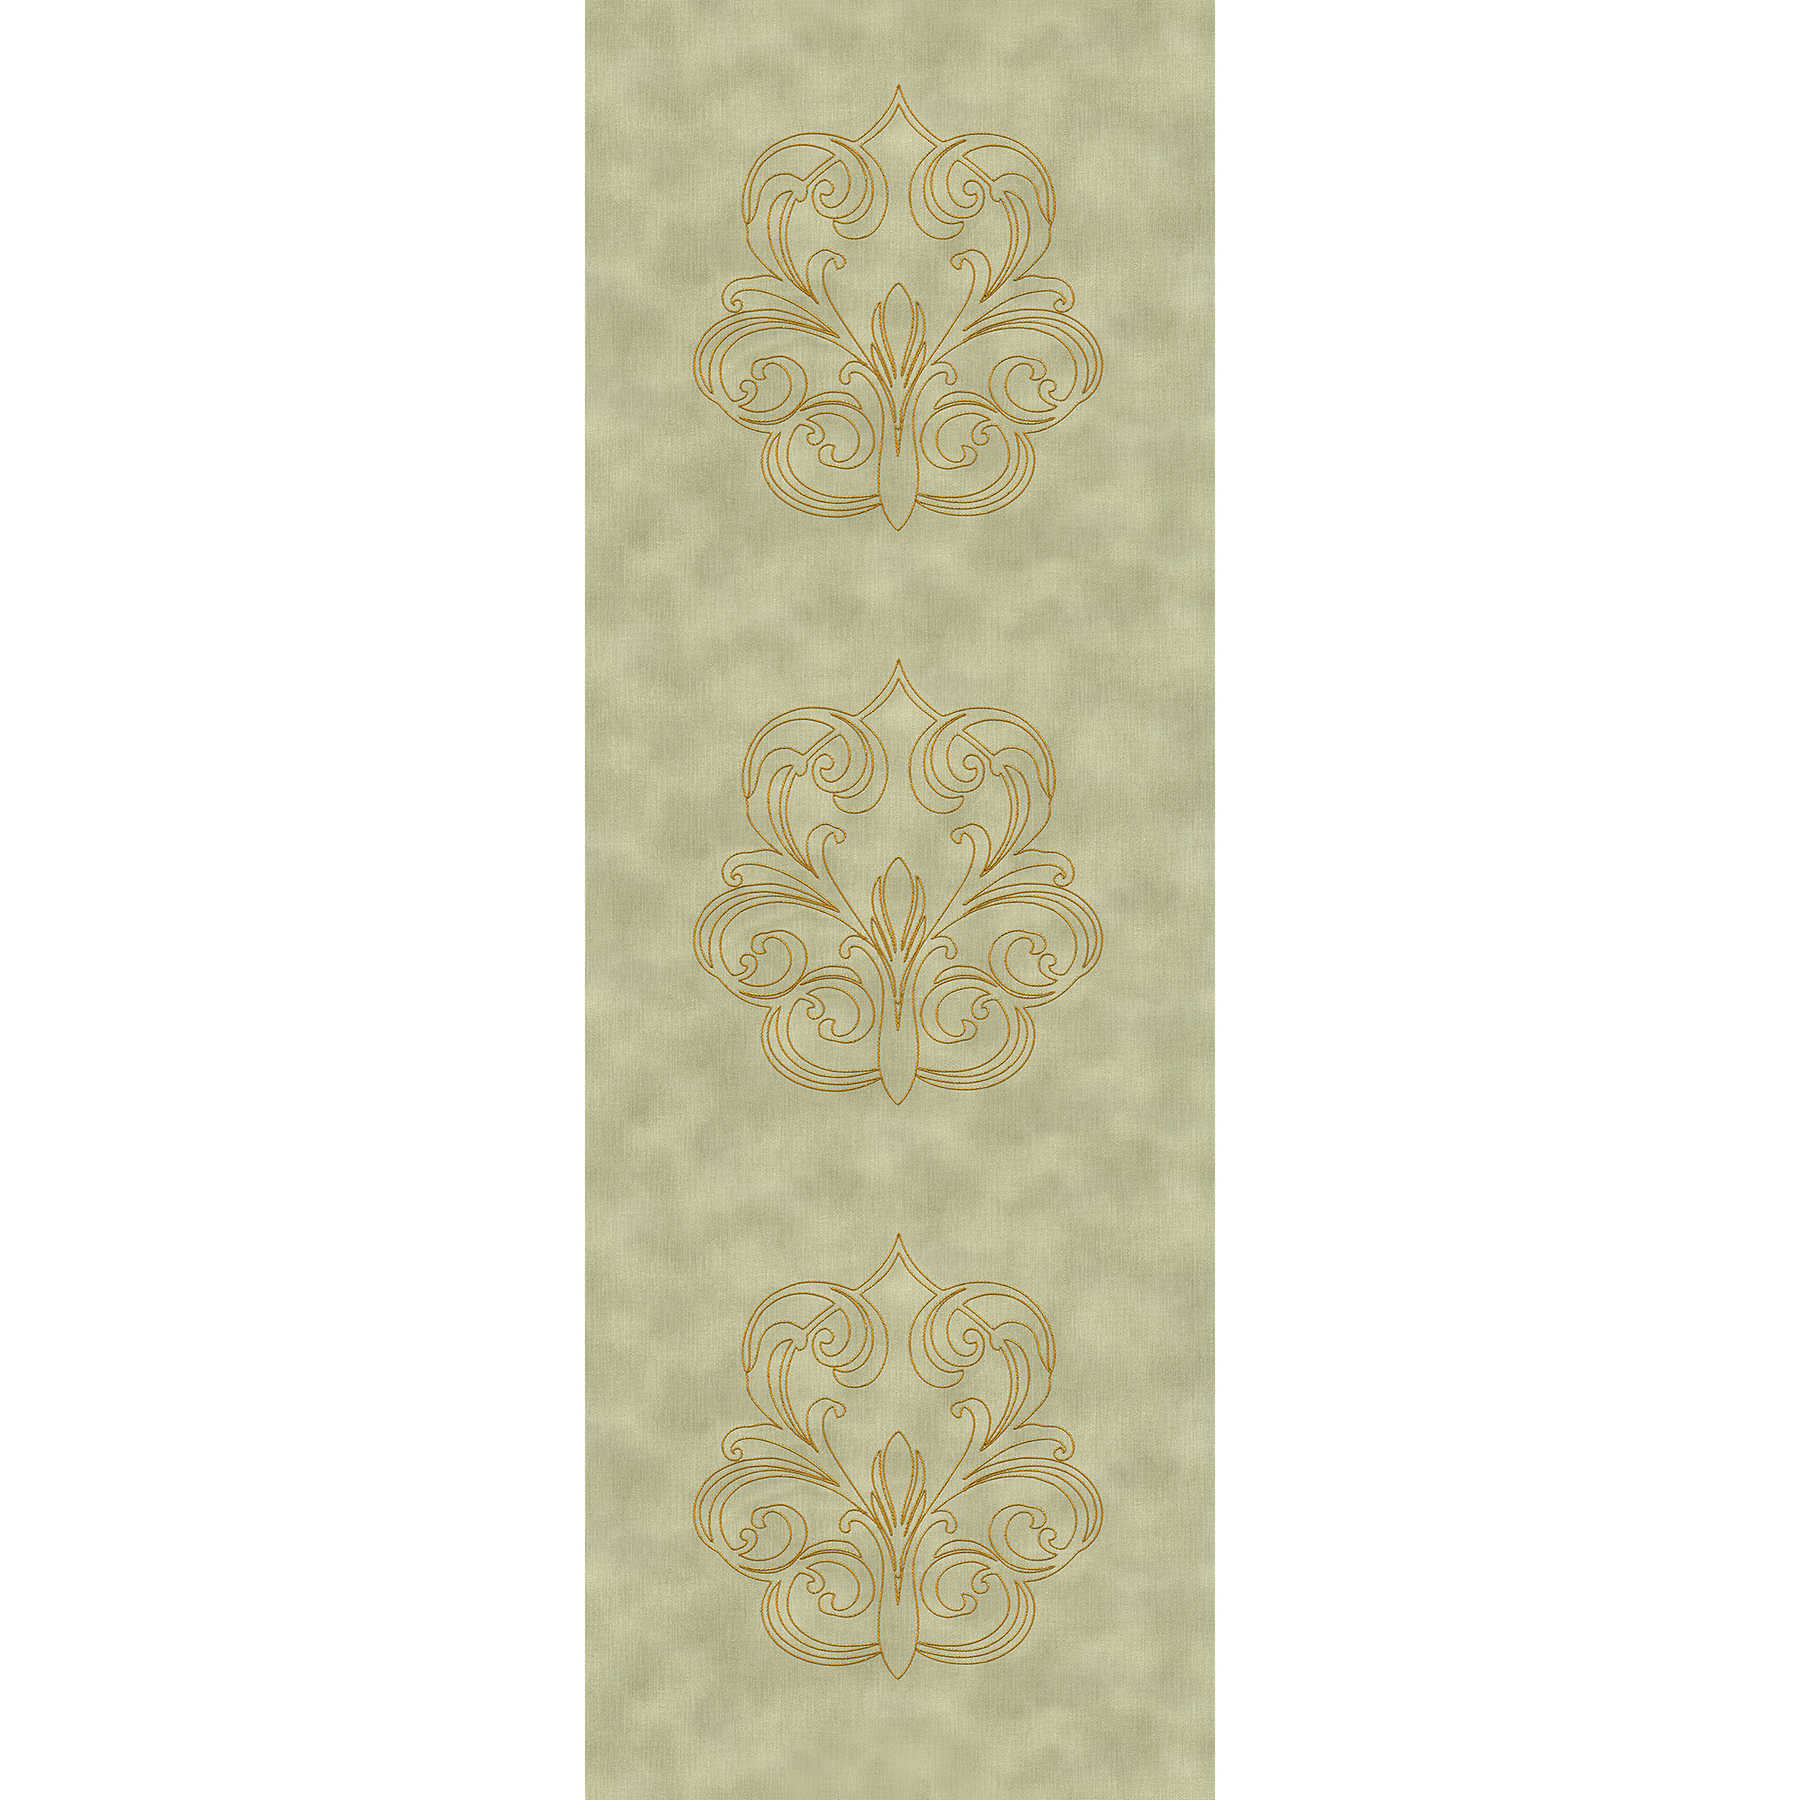         Premium Panel with Baroque Ornaments - Green, Gold
    